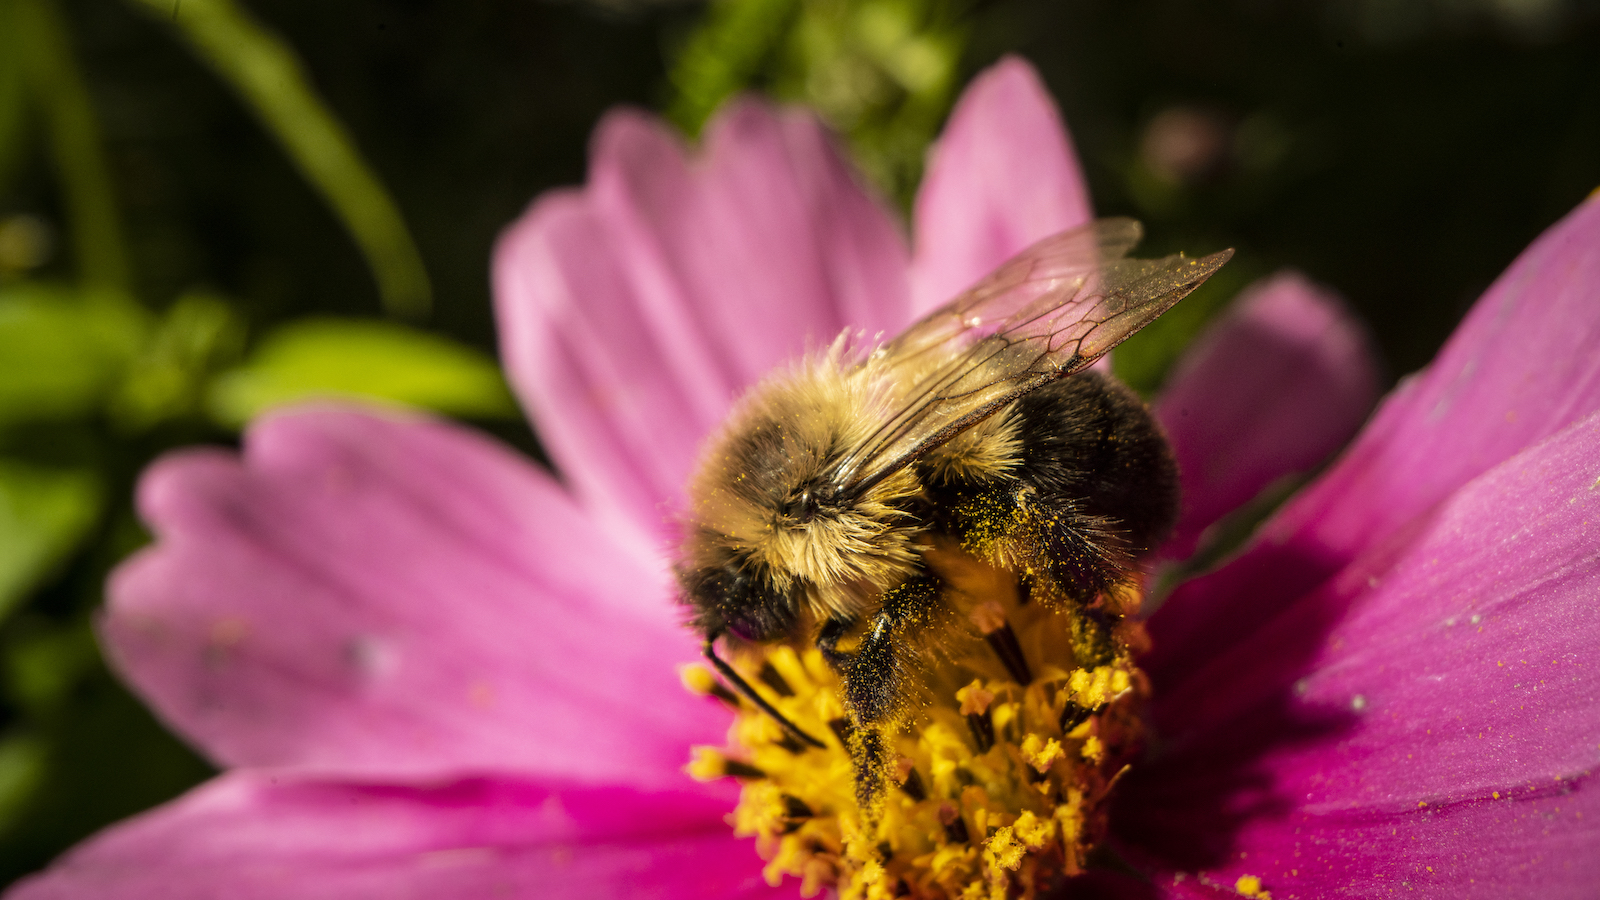 It's time to list the American bumblebee as endangered